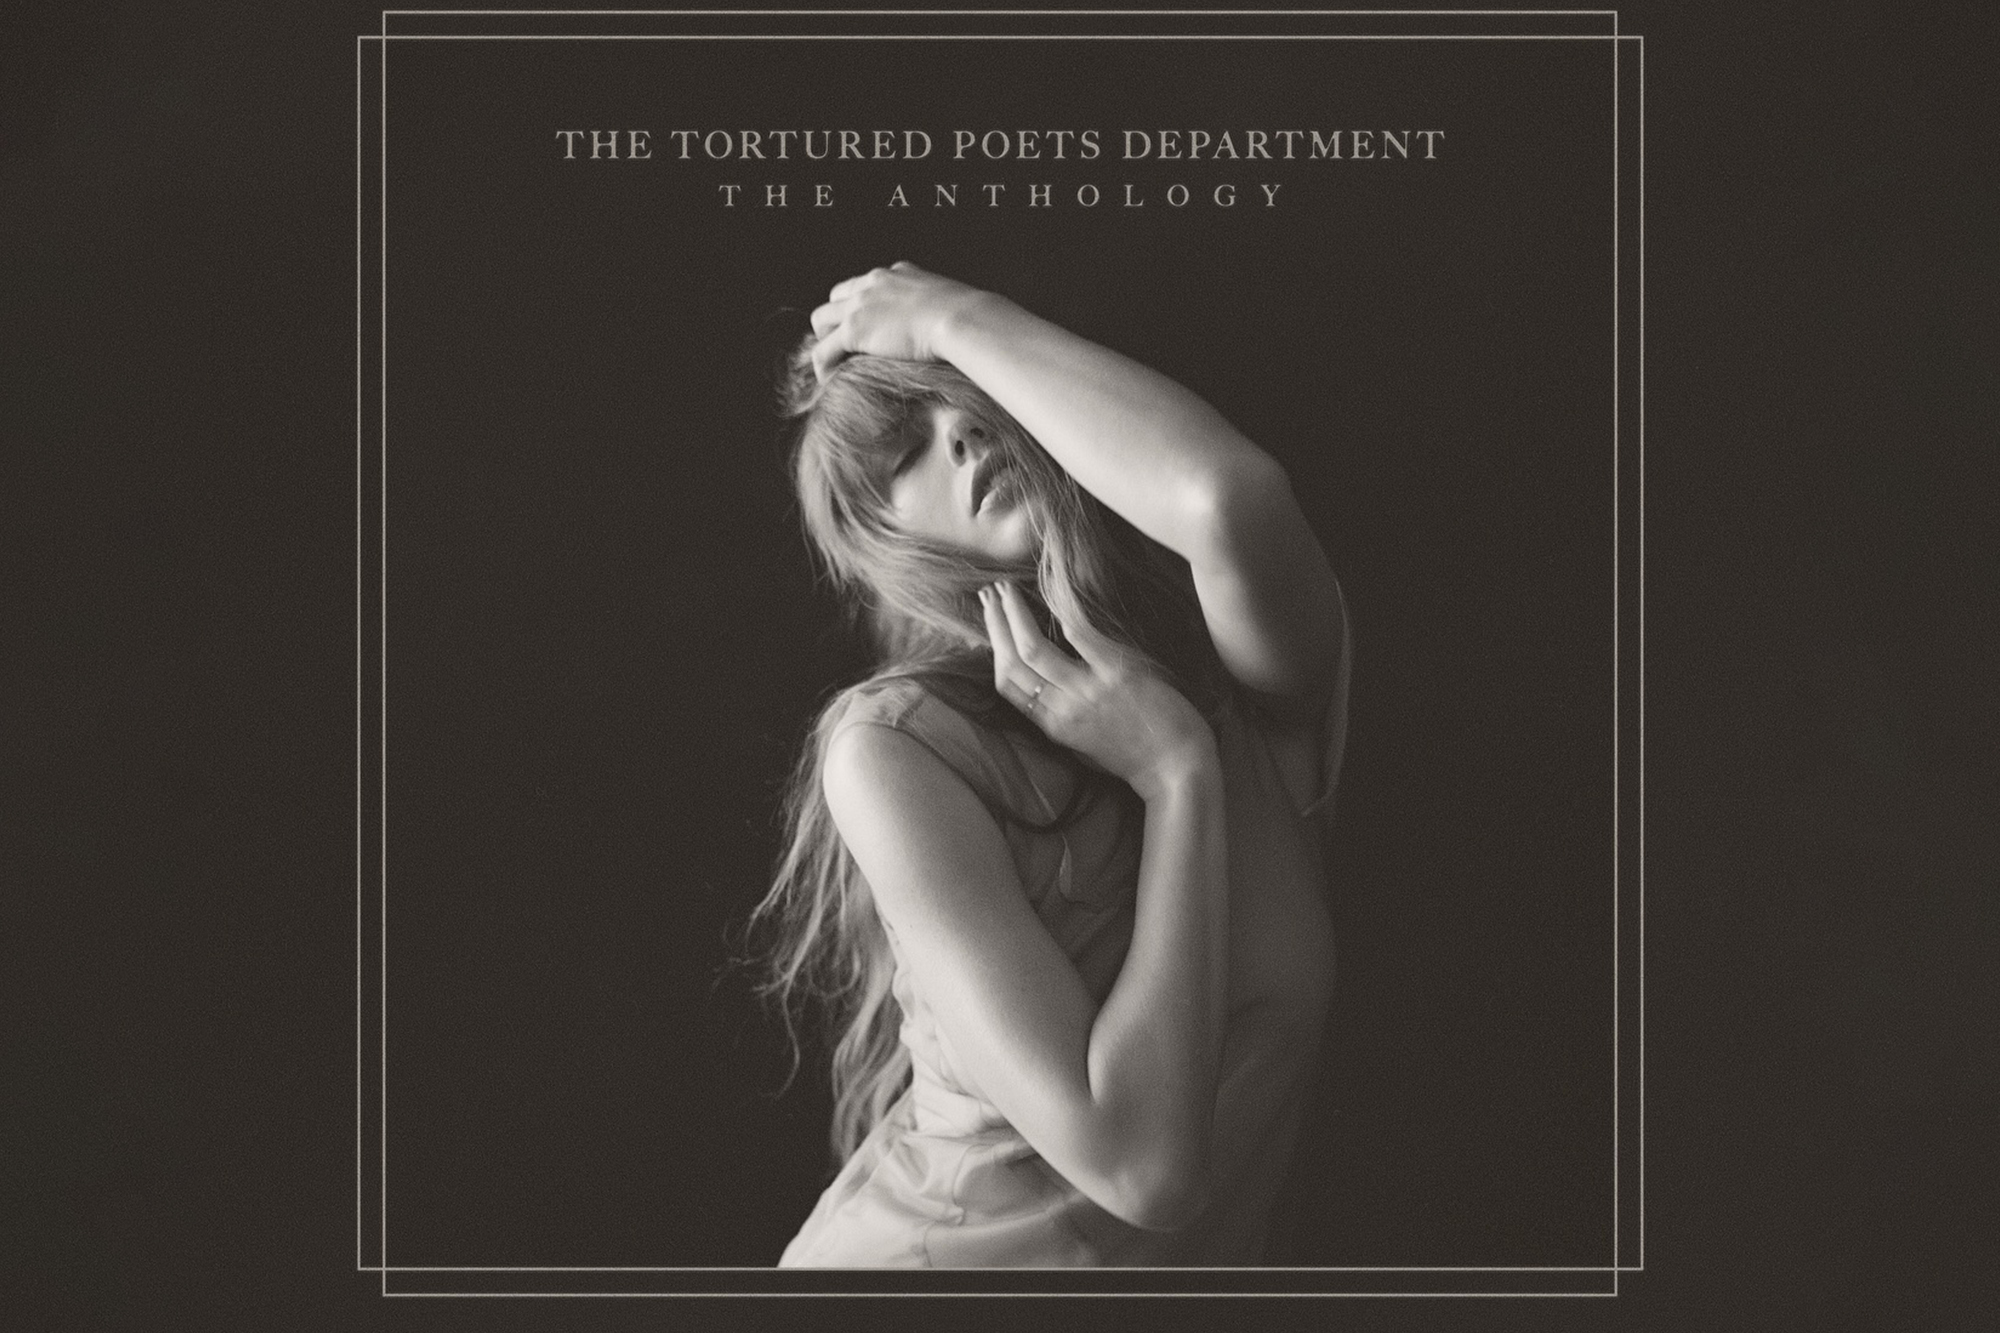 Taylor Swift unveils surprise double album ‘The Tortured Poets Department: The Anthology’ — and fans go wild